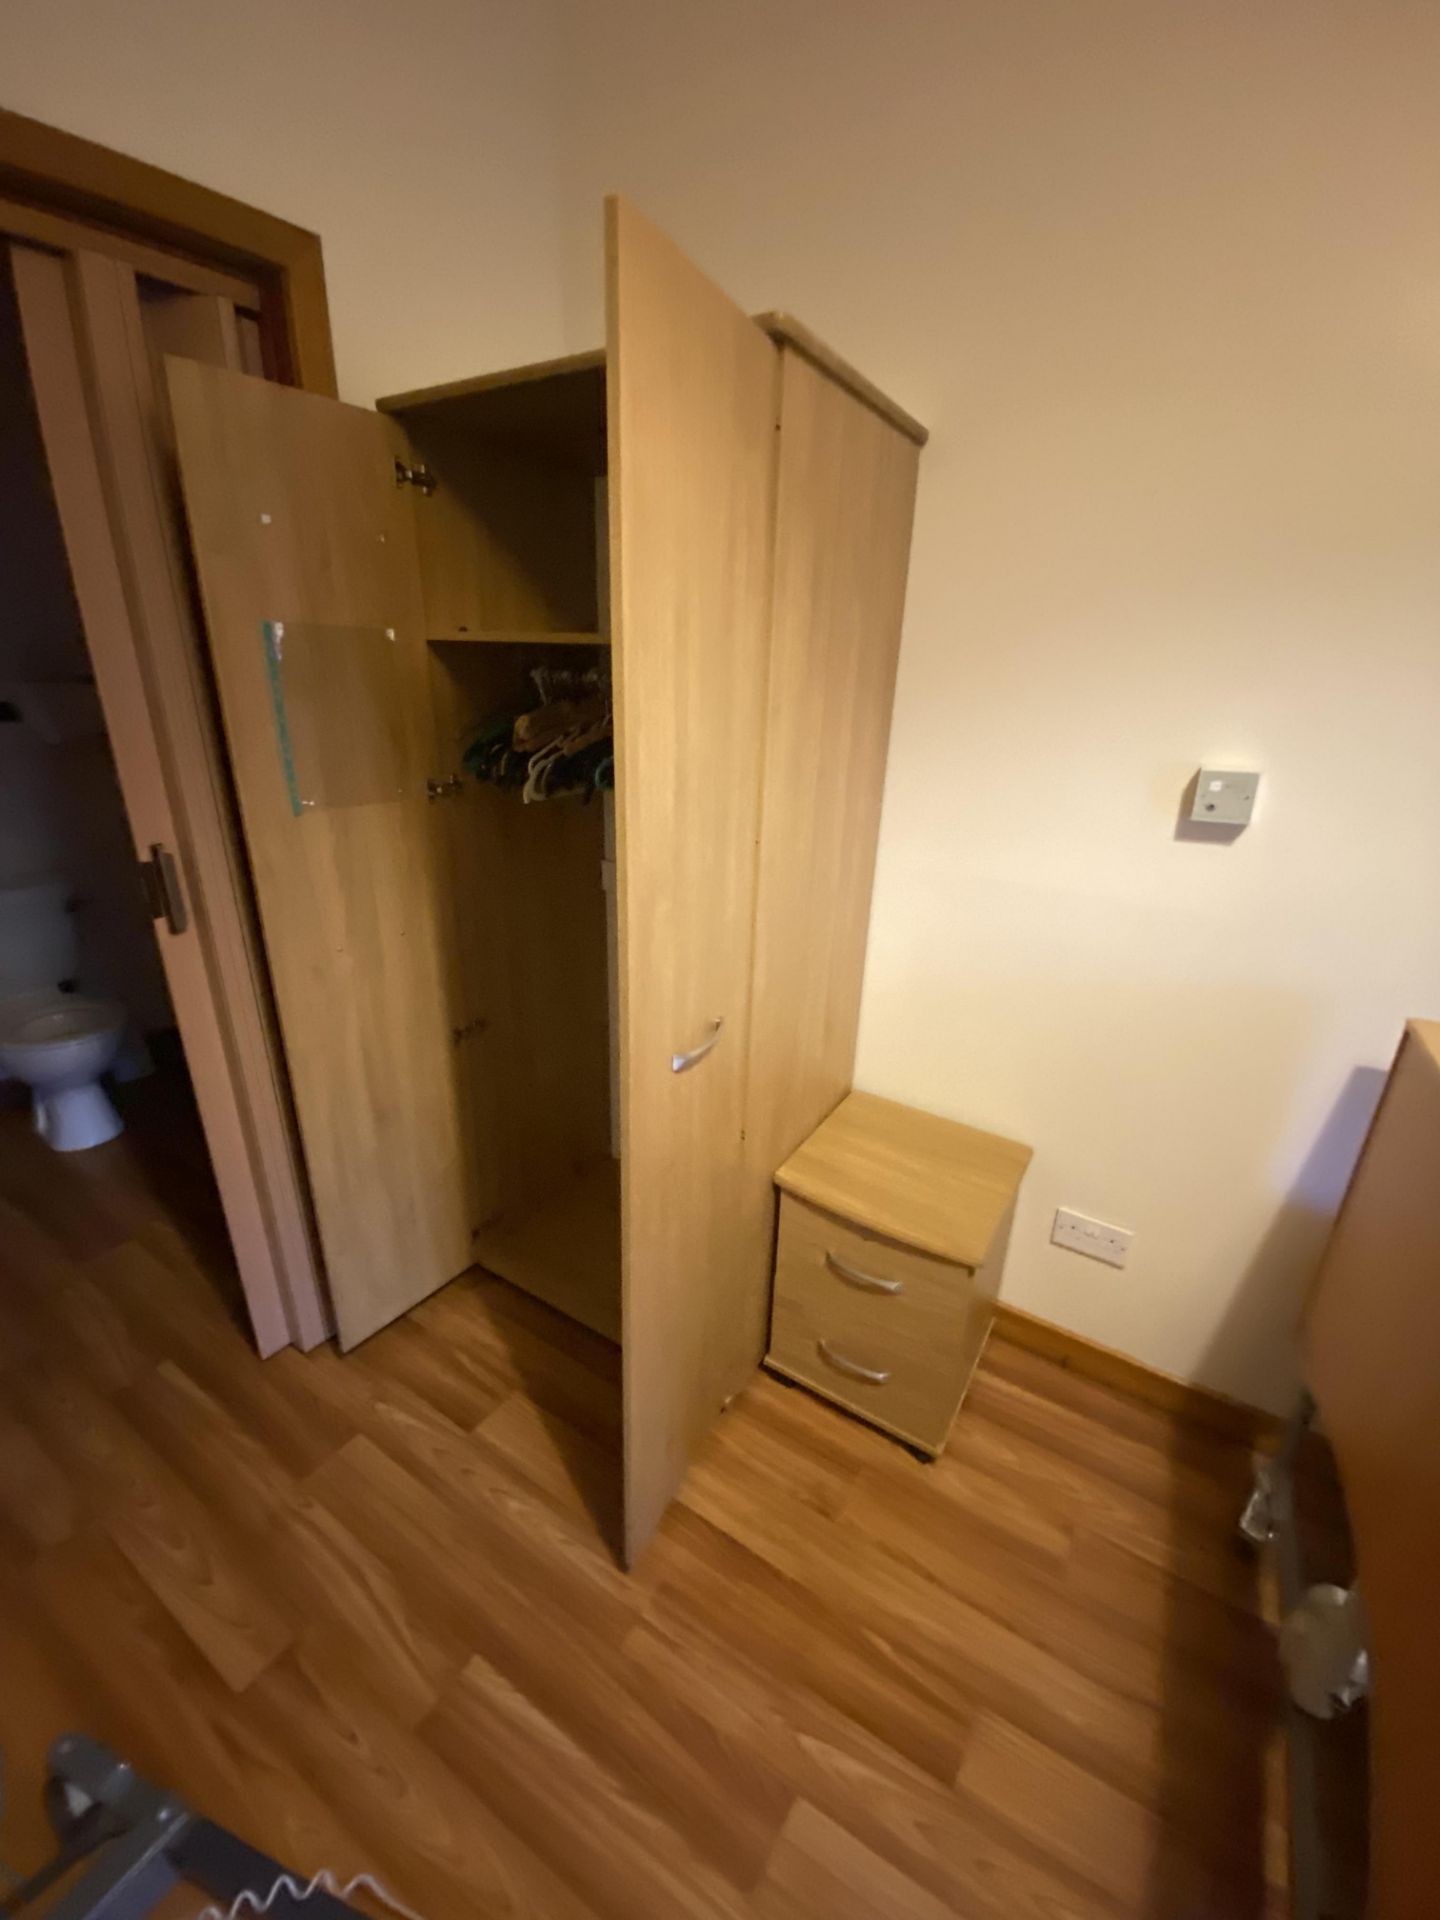 Remaining Bedroom Furniture, including oak laminated wardrobe, three drawer chest-of-drawers, - Image 2 of 2